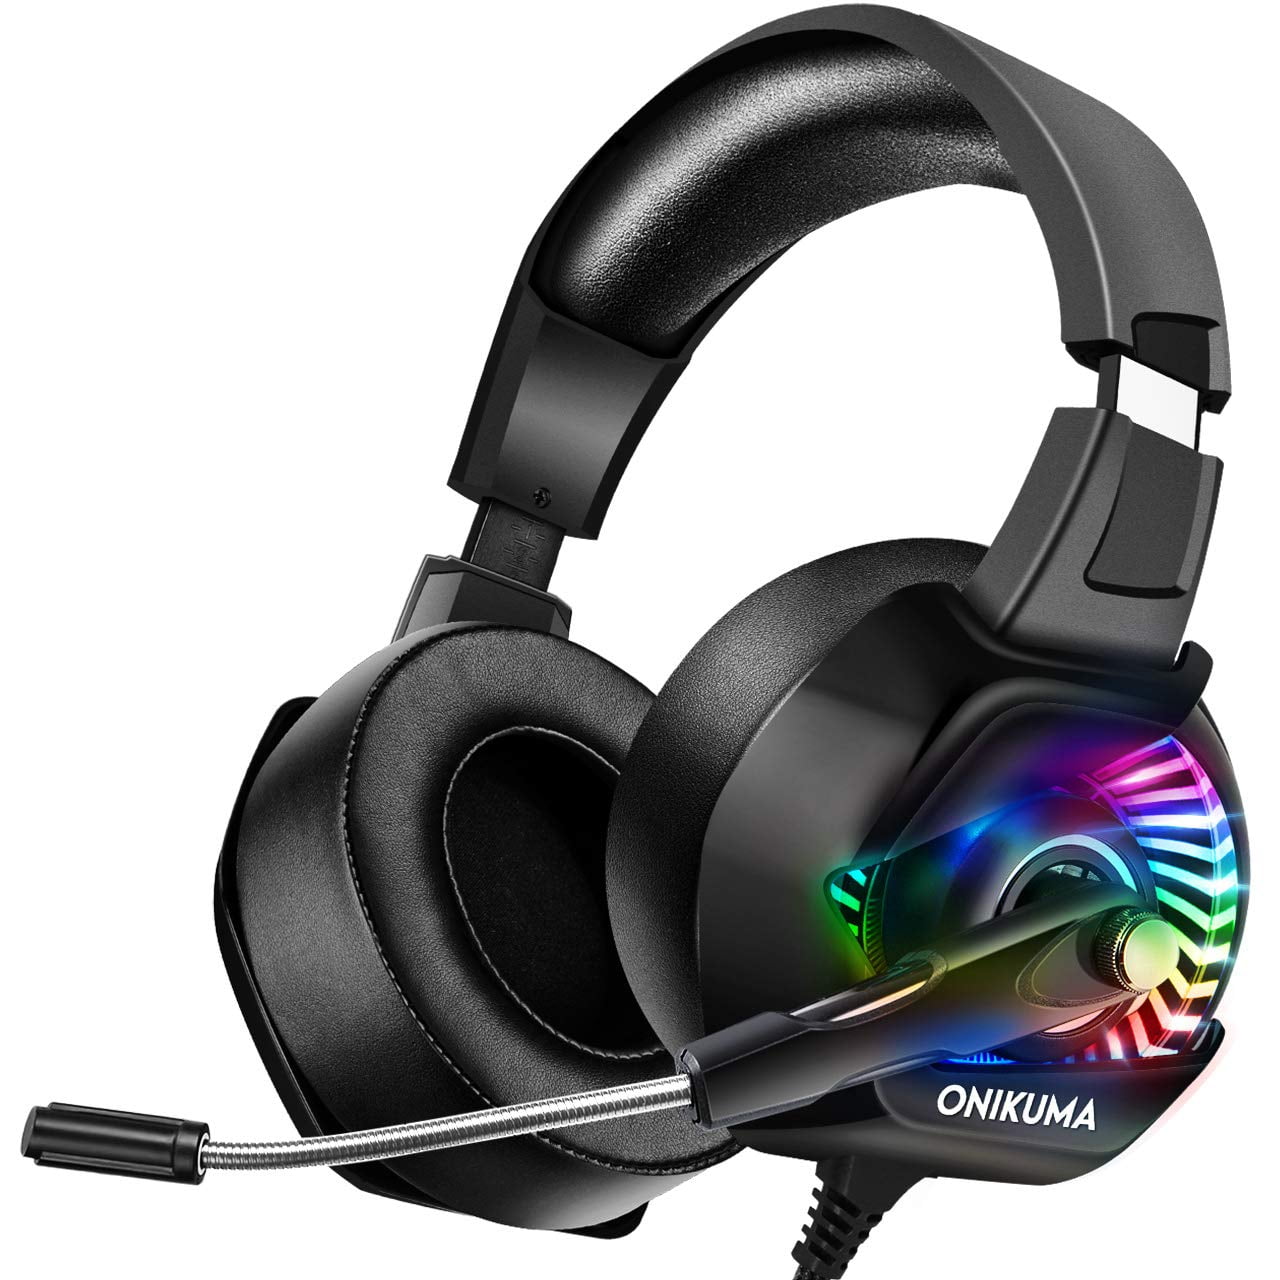 gaming headset xbox one with mic